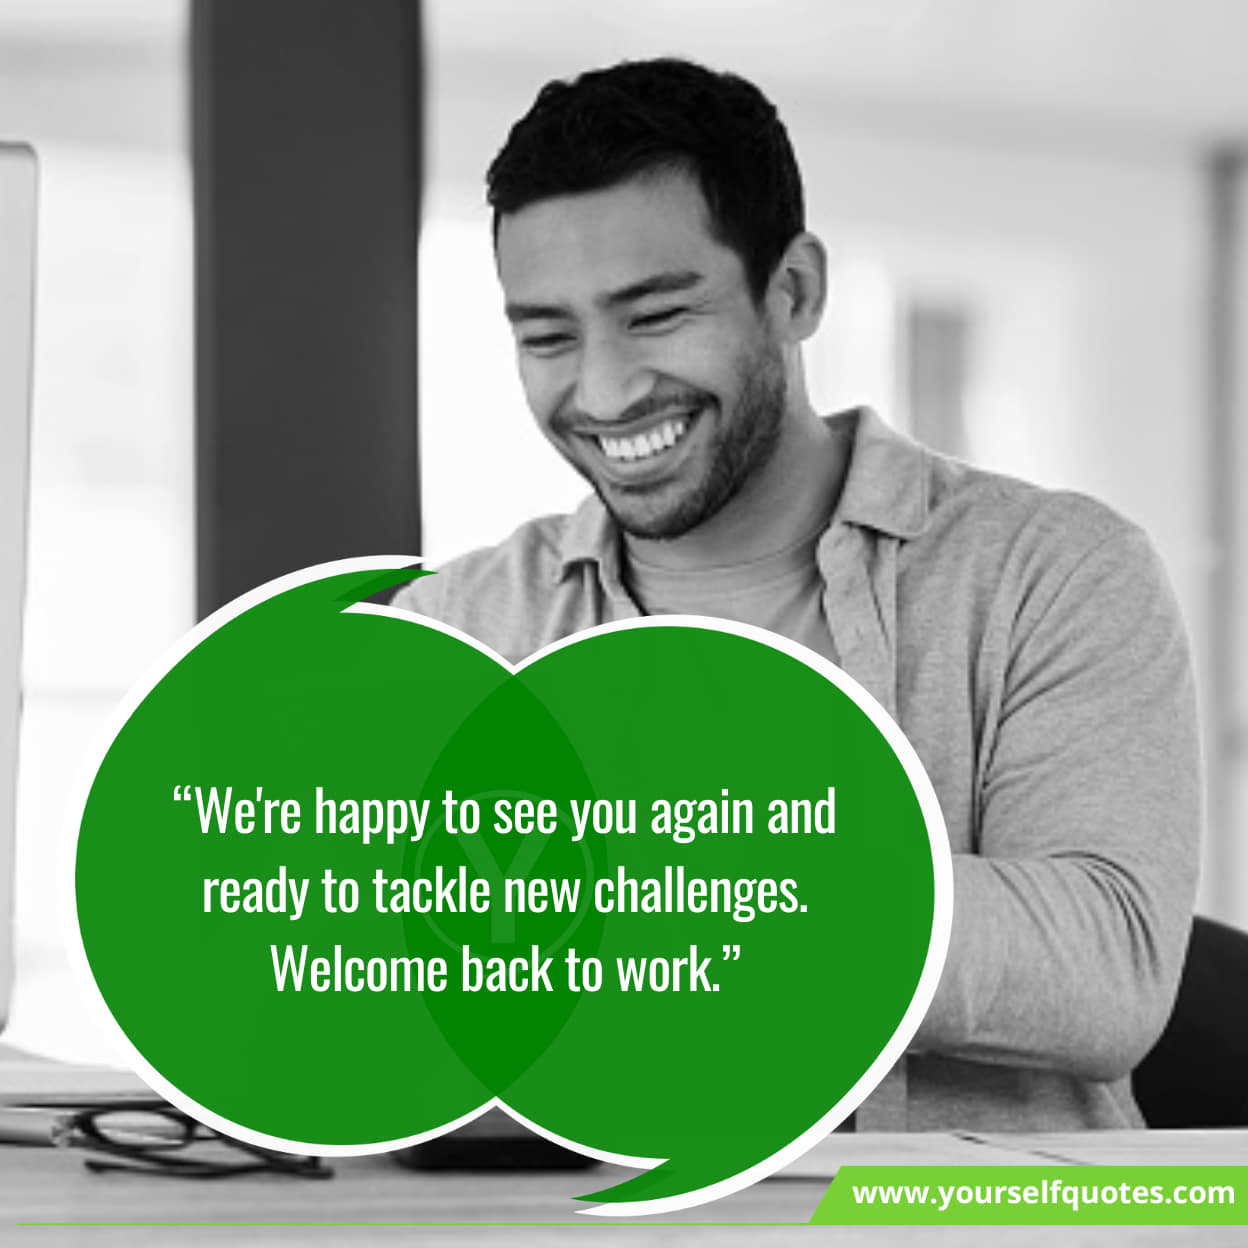 Sayings About welcome back to work